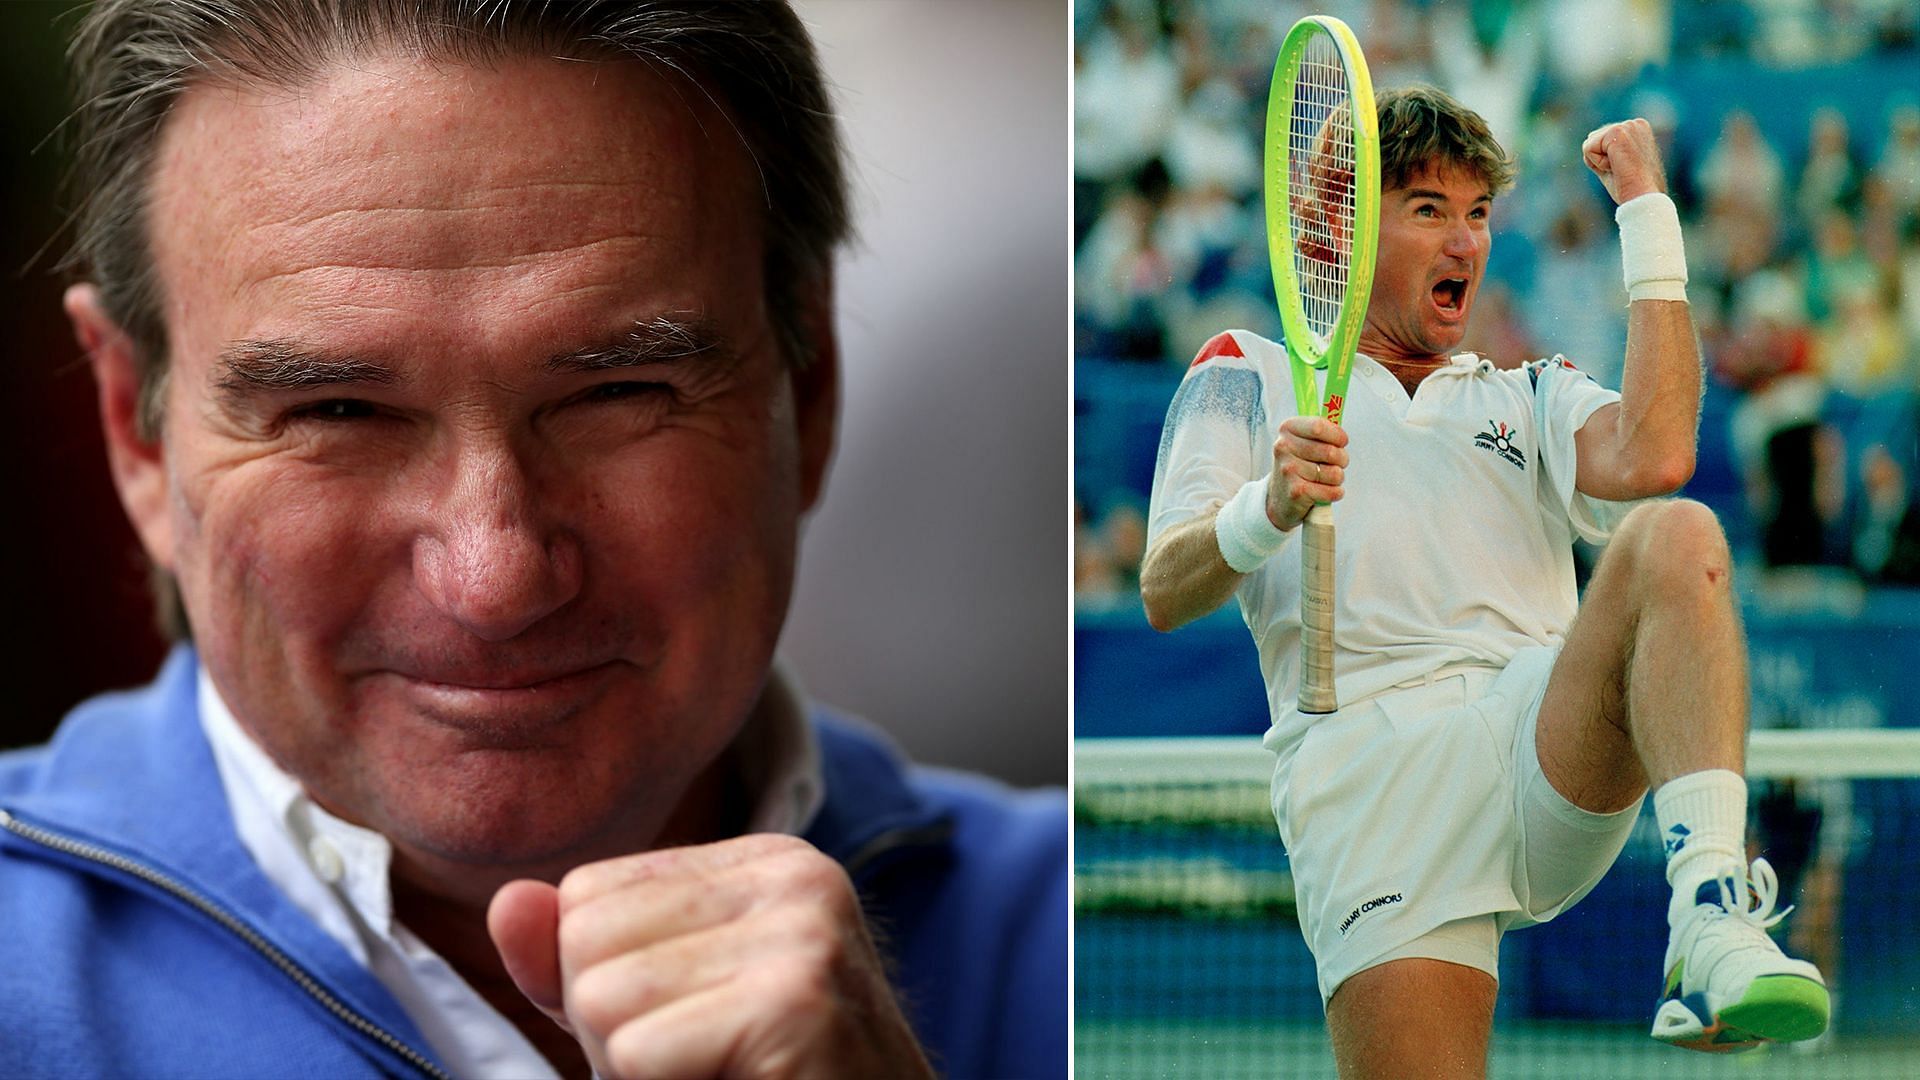 Jimmy Connors is an eight-time Grand Slam champion.